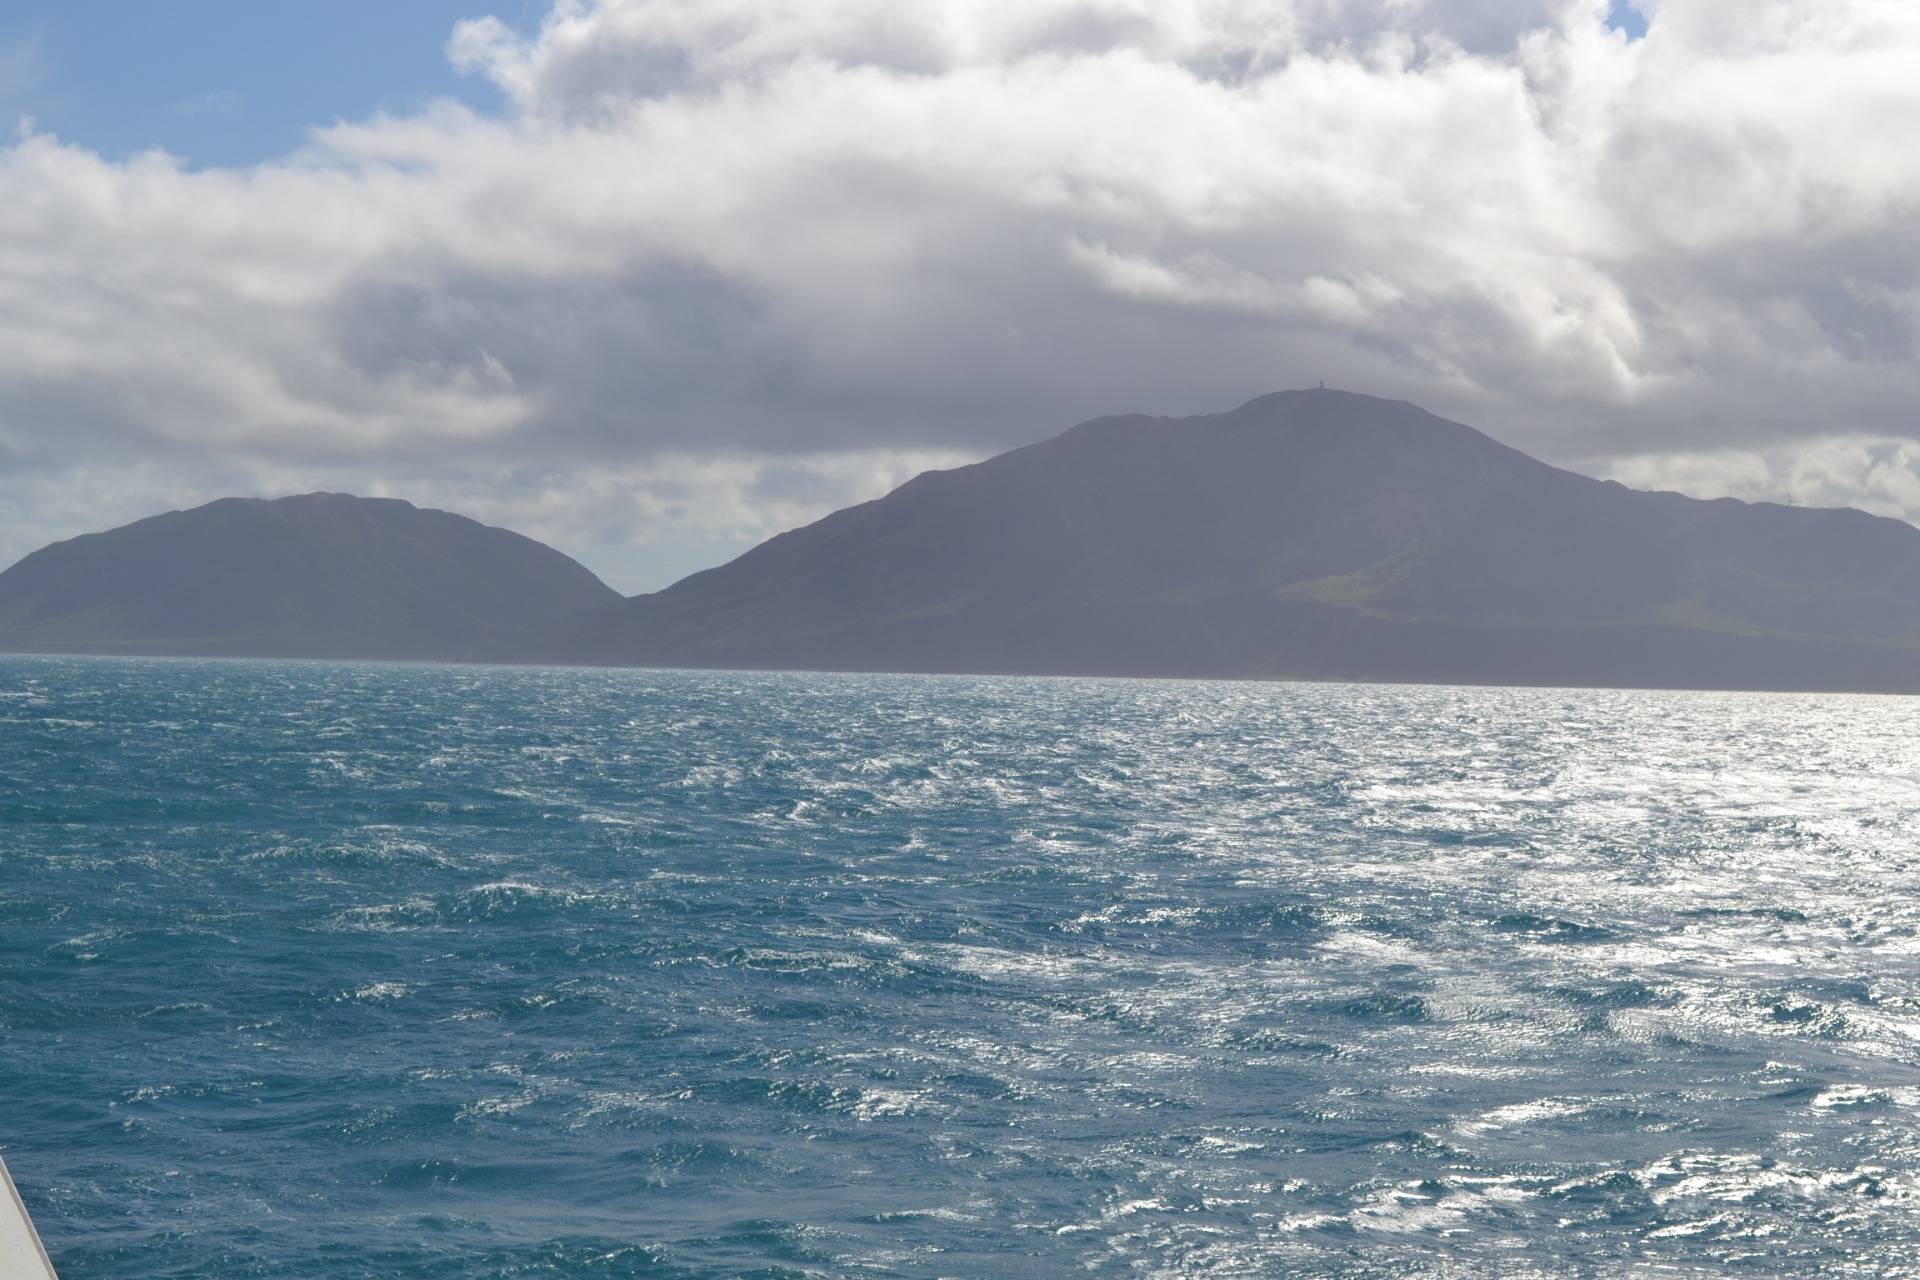 Stormy sea with waves and whitecaps. in Cook Strait New Zealand